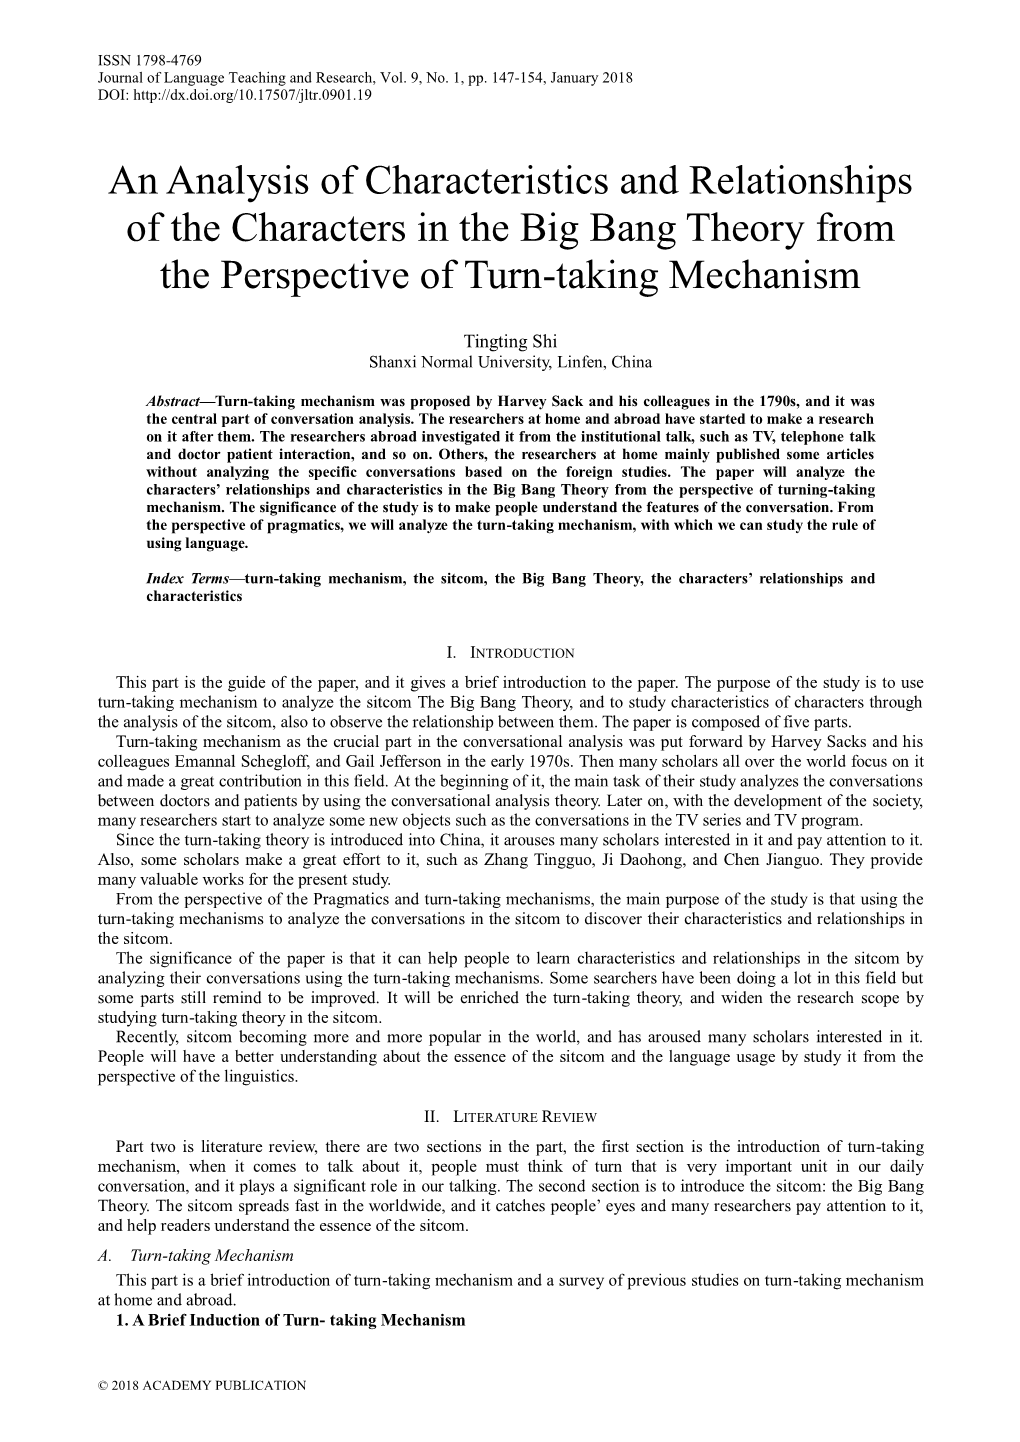 An Analysis of Characteristics and Relationships of the Characters in the Big Bang Theory from the Perspective of Turn-Taking Mechanism